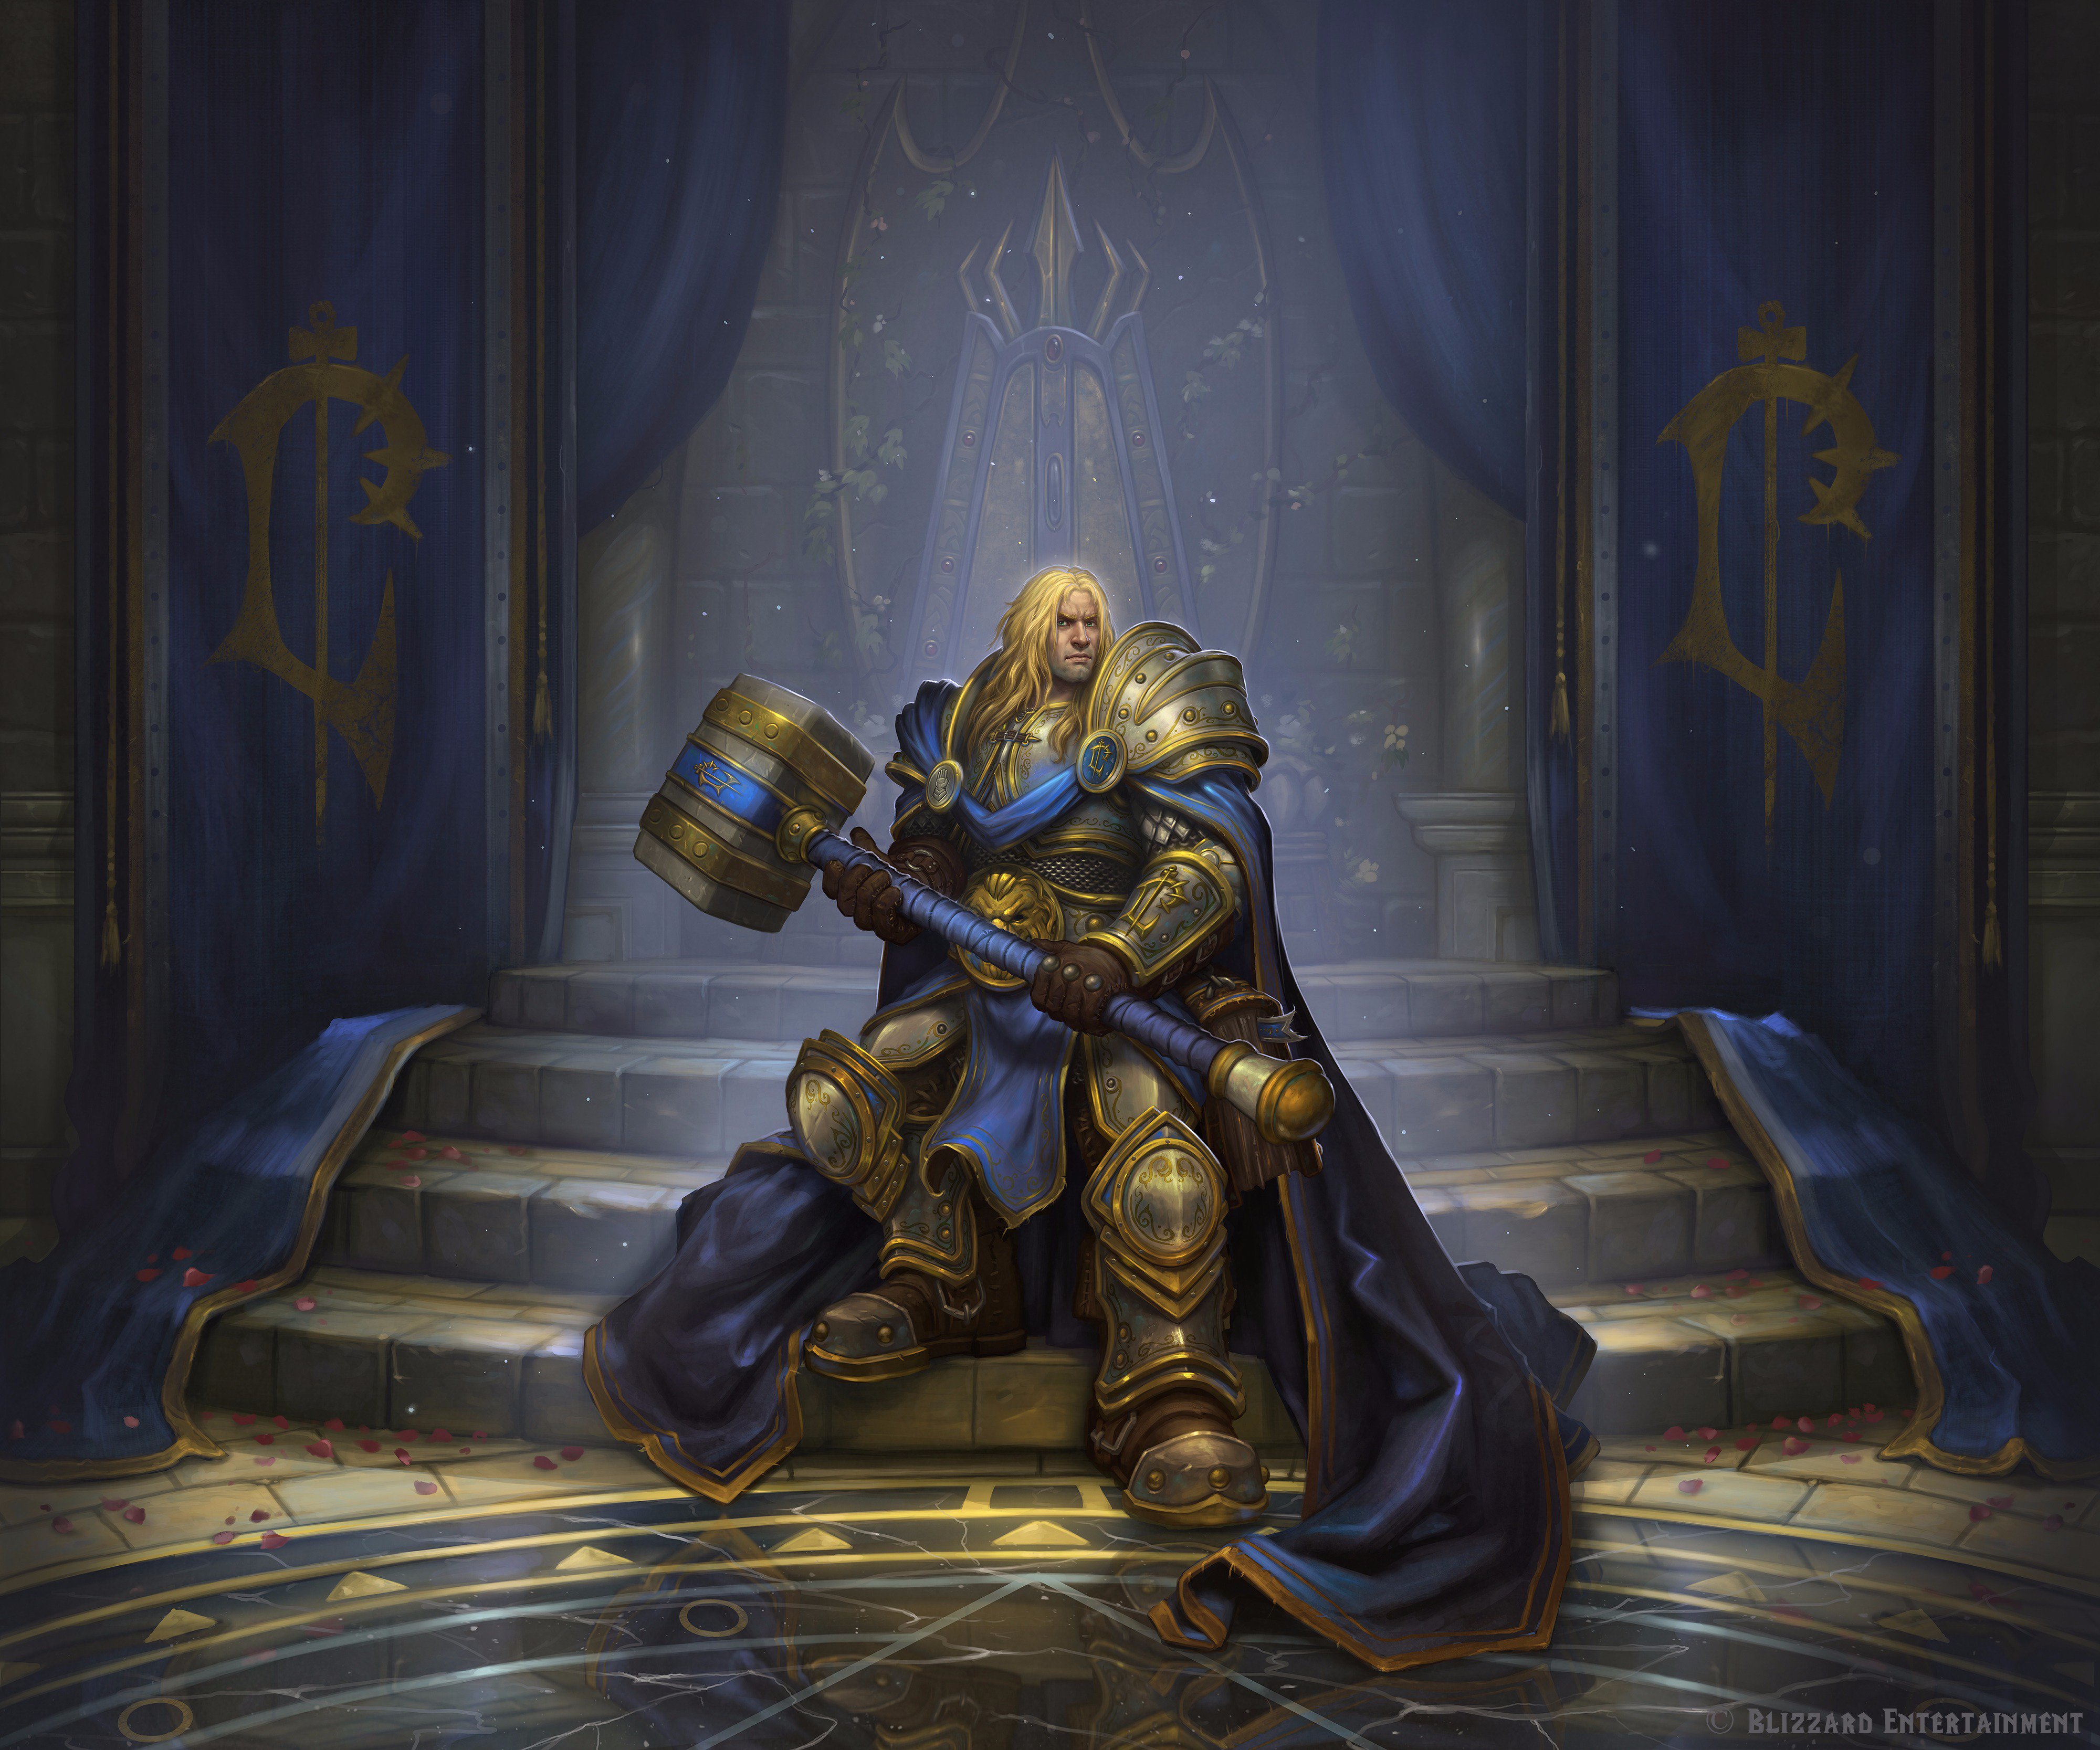 Eric Braddock on "My contribution for Hearthstone: Knights of the Frozen Throne! :) Crown Prince Arthas Menethil https://t.co/nJhqfAhy25 https://t.co/NKjIx2xzLF" / Twitter